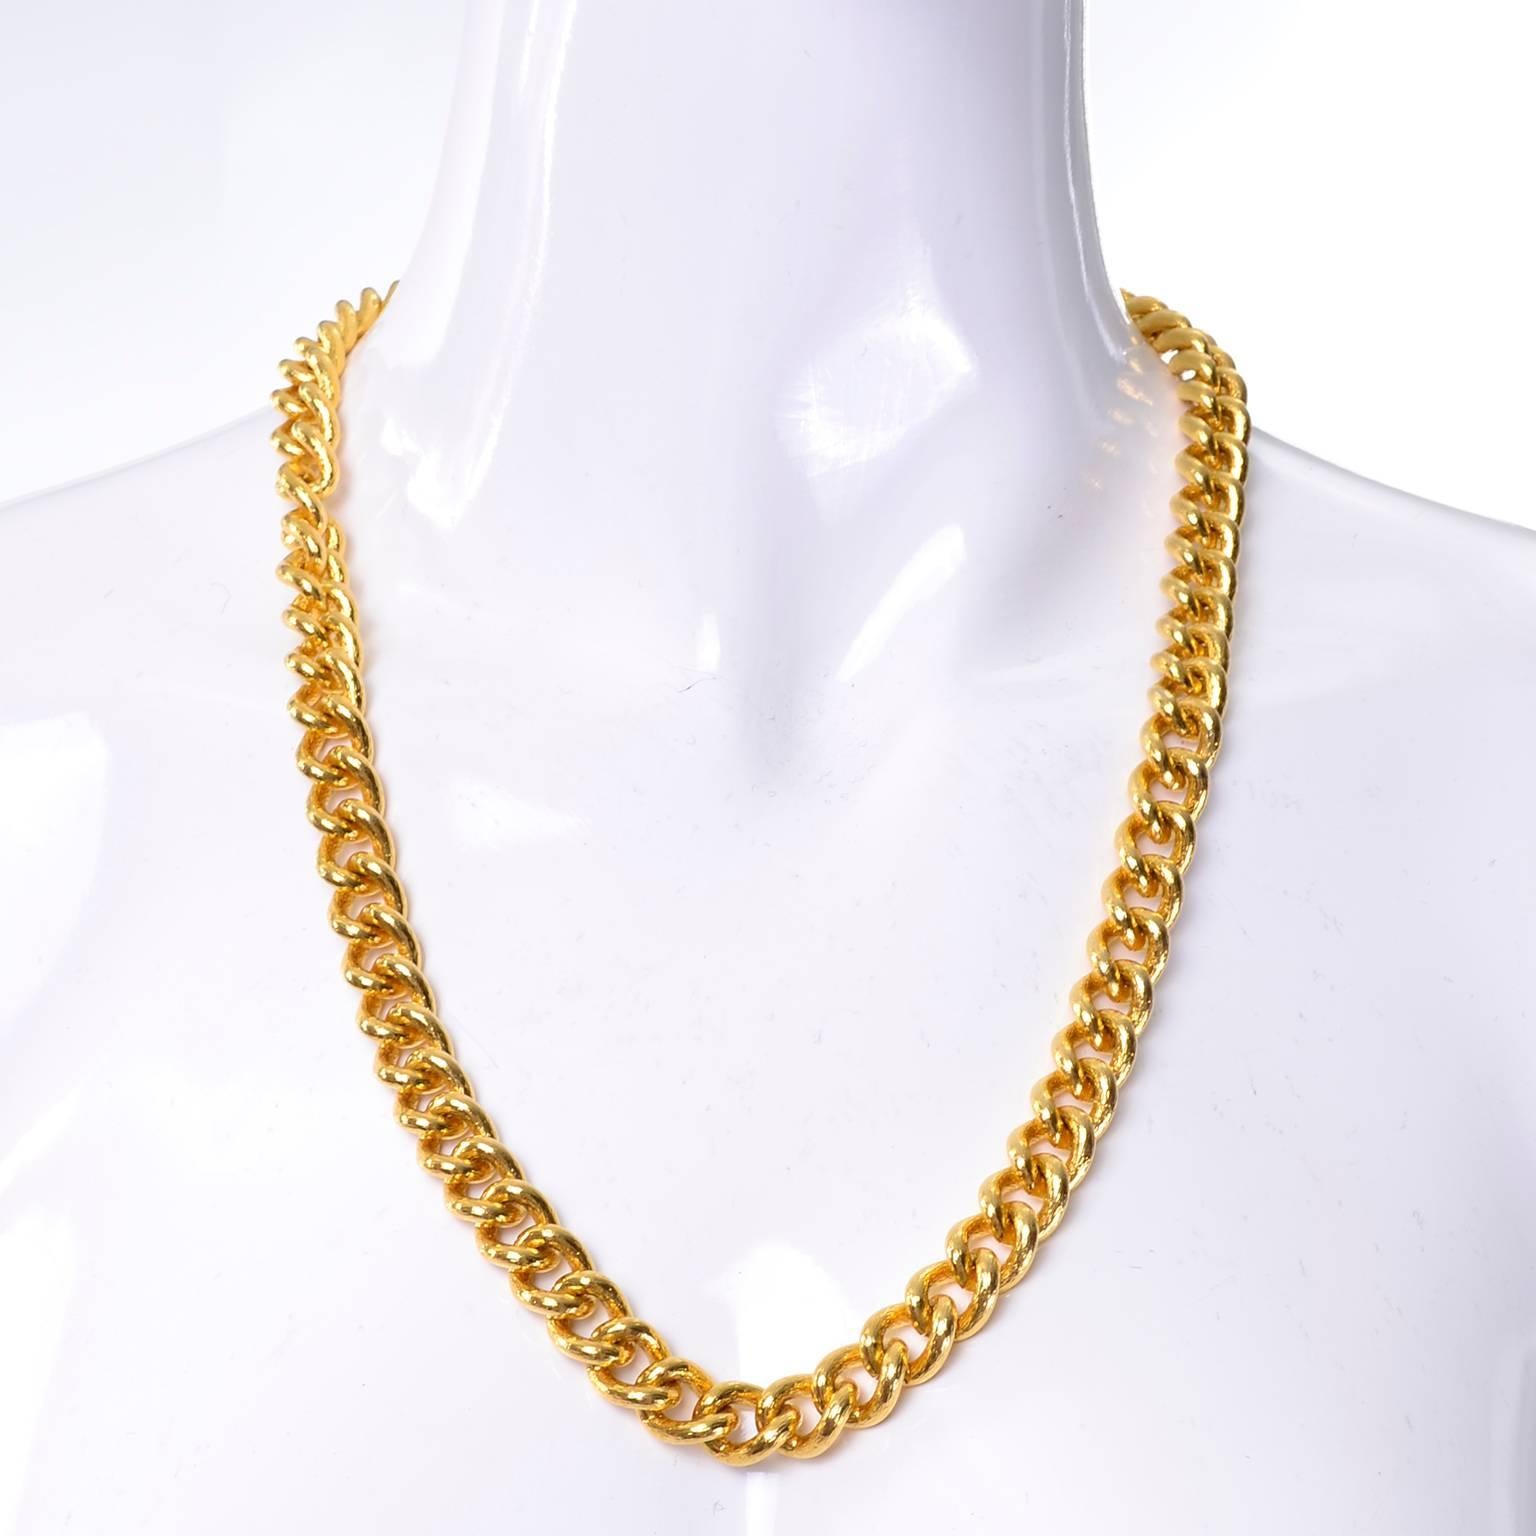 This is a gorgoues vintage 1980's Givenchy heavy gold link chain necklace. This great necklace measures 24